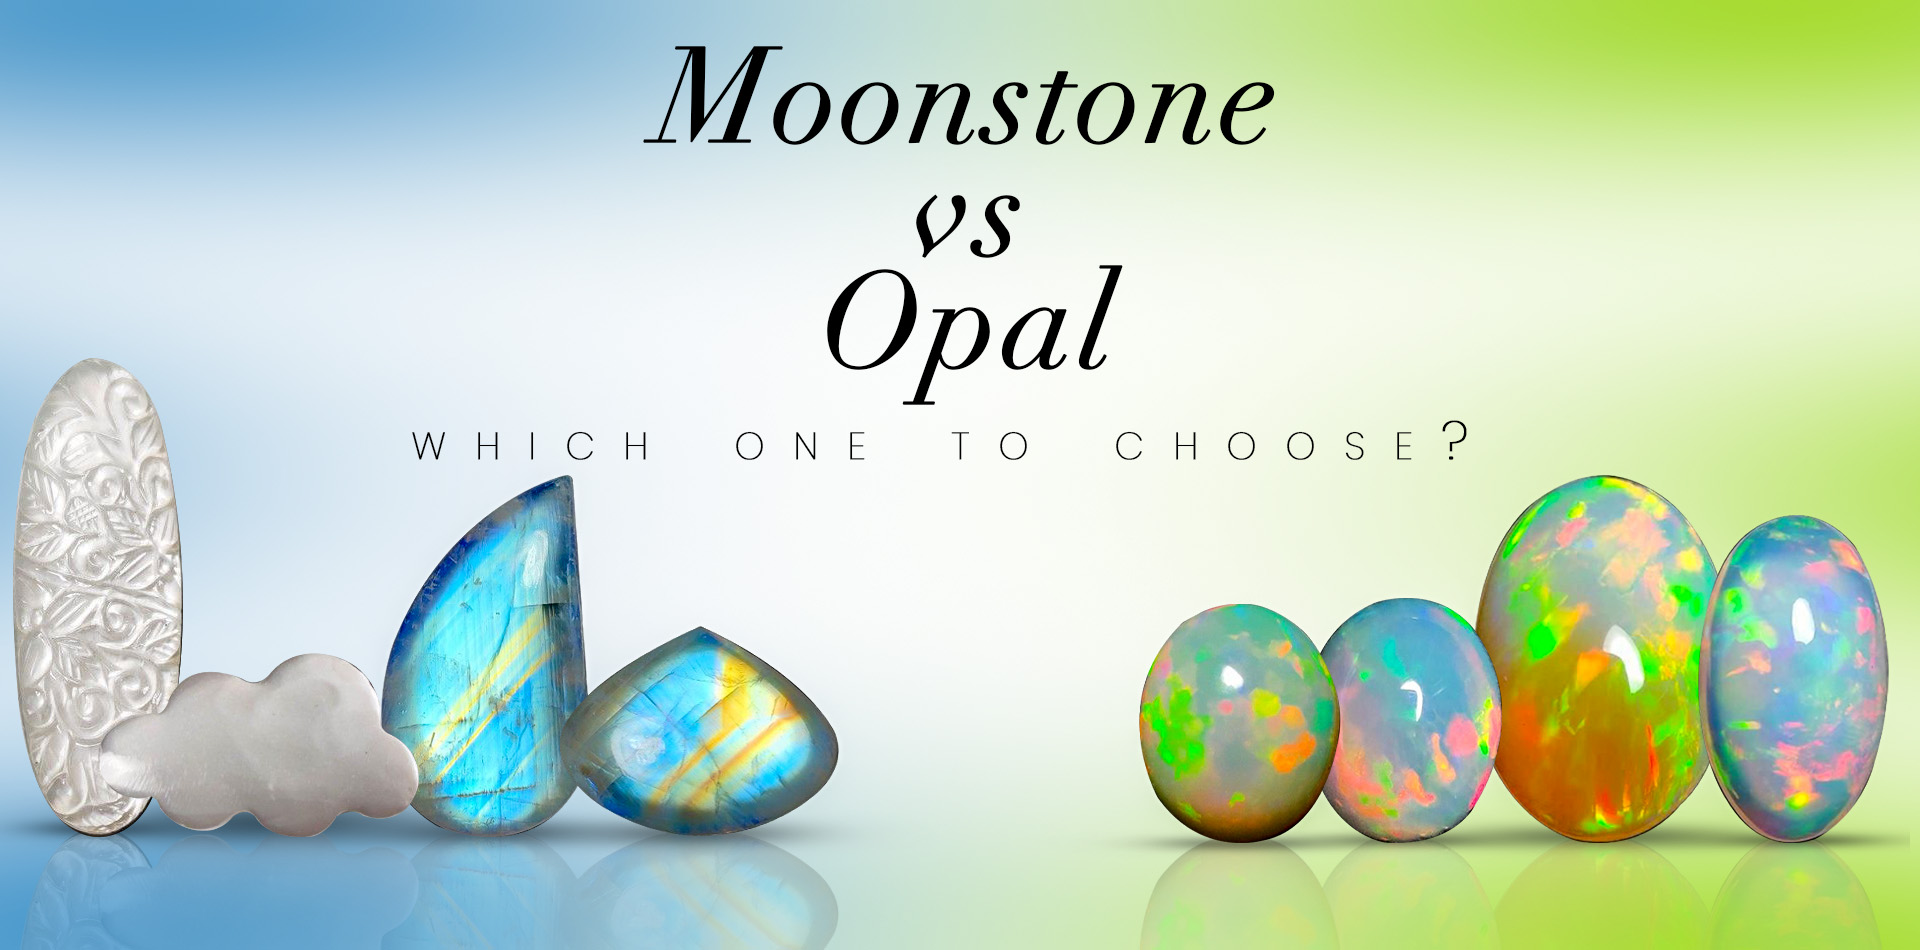 Moonstone VS Opal Gemstone: Which One to Choose?